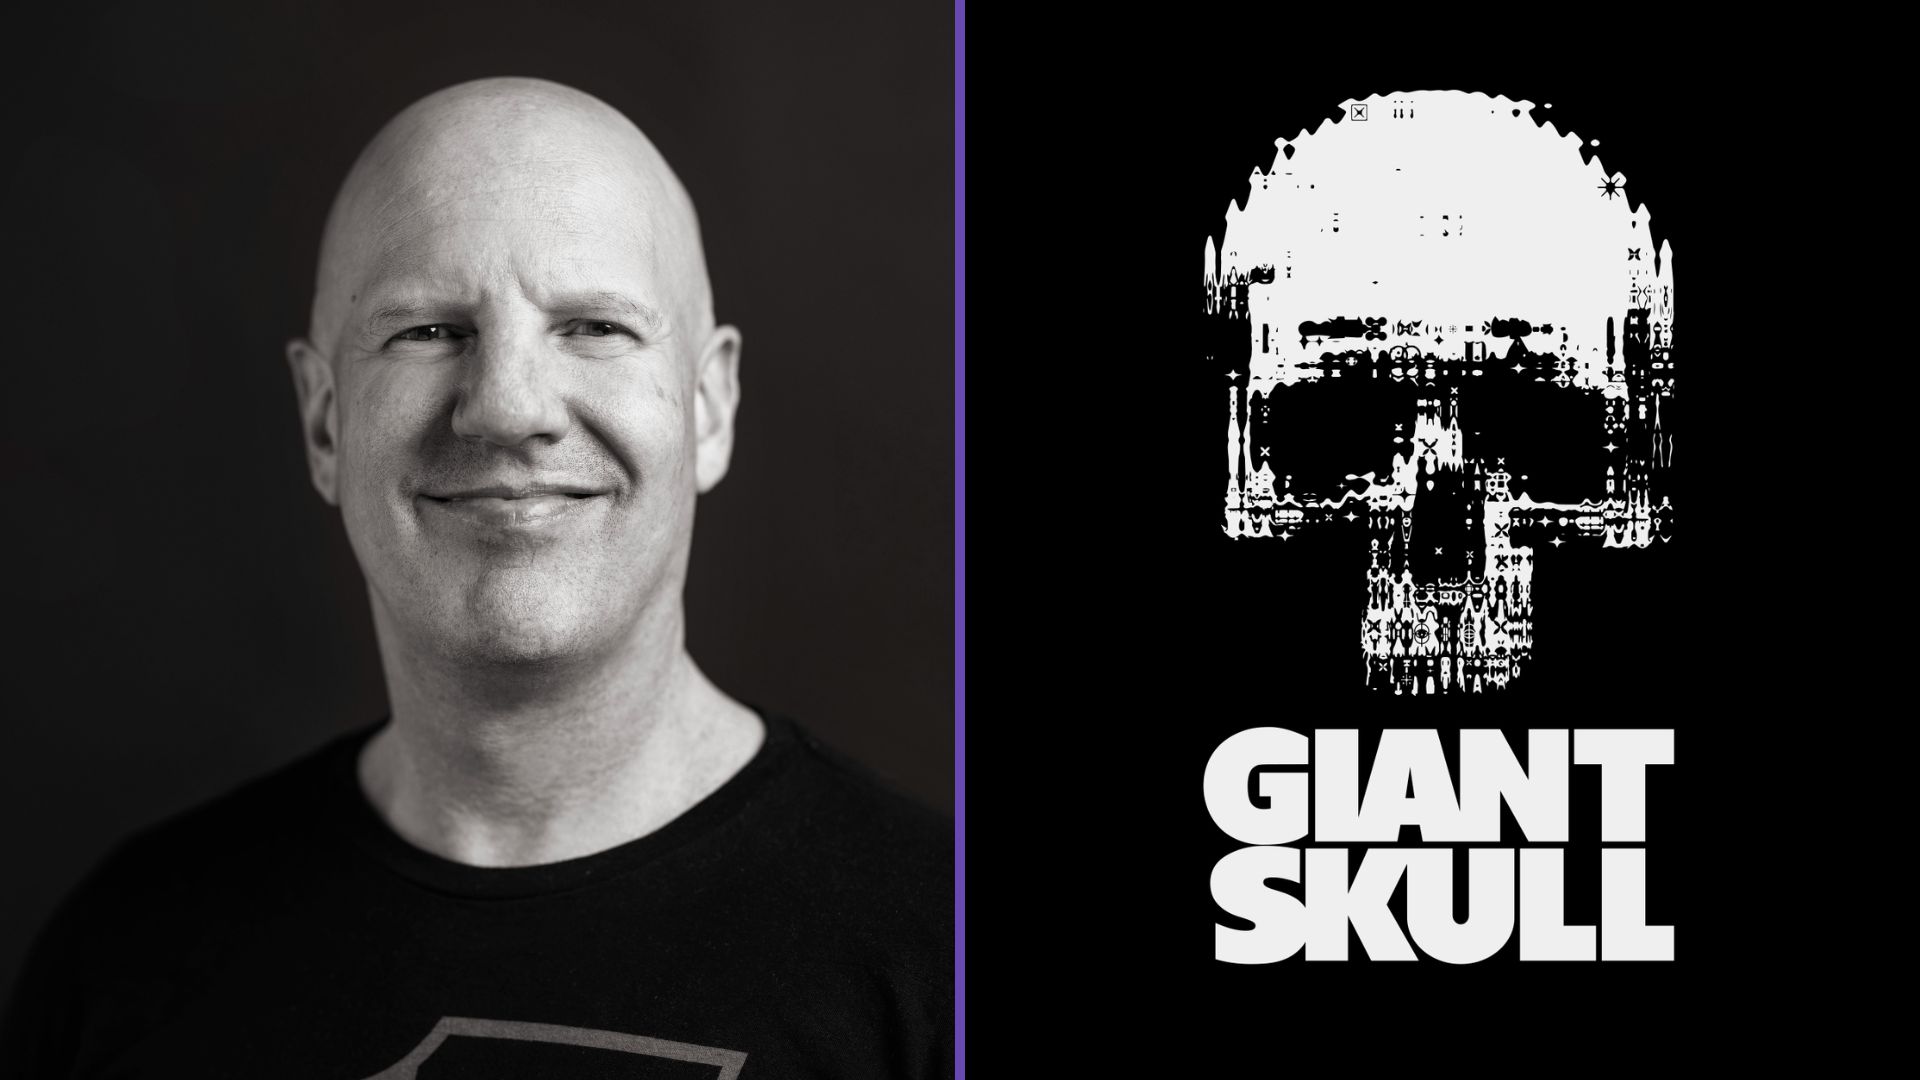 God Of War 3 Director Stig Asmussen Launches Giant Skull, Their Website Is The Craziest Thing You’ve Seen